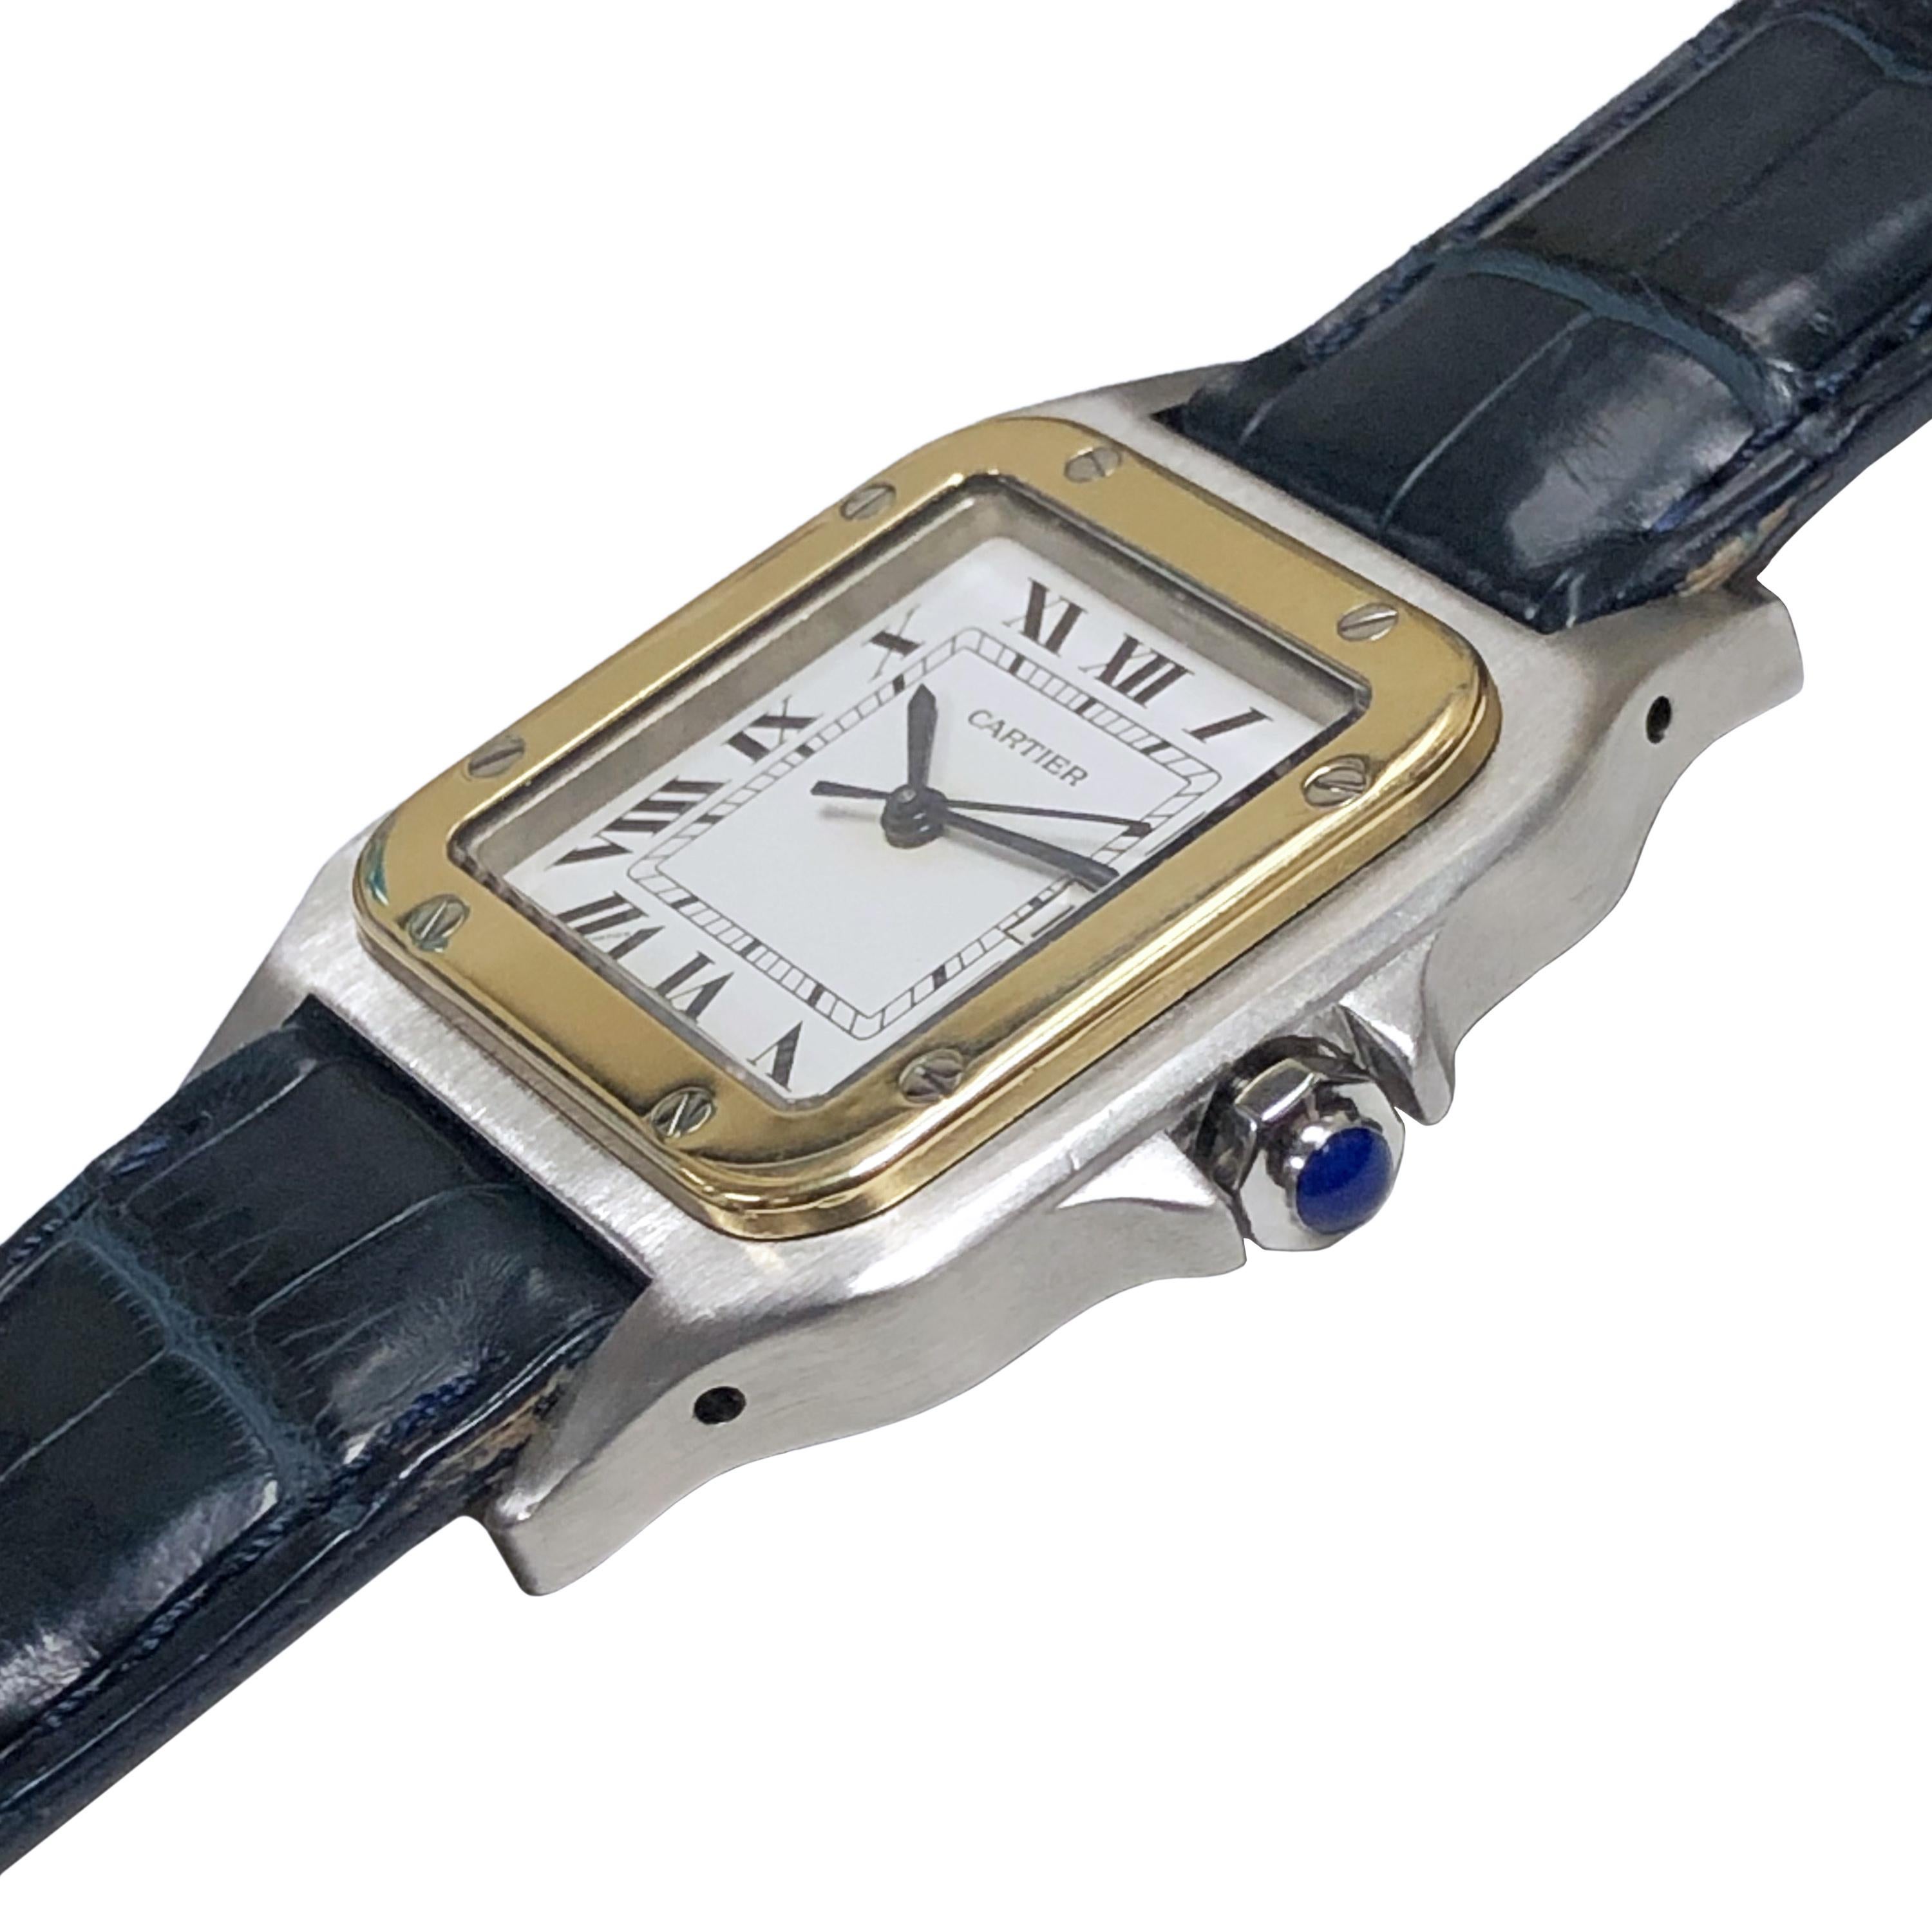 Circa 2005 Cartier Santos Wrist Watch, 41 M.M. ( lug end to end ) X 29 M.M. Stainless Steel 2 piece Water resistant case with 18k Yellow Gold Bezel. Automatic, self winding movement, Sapphire Crown, White dial with Black Roman numerals, sweep